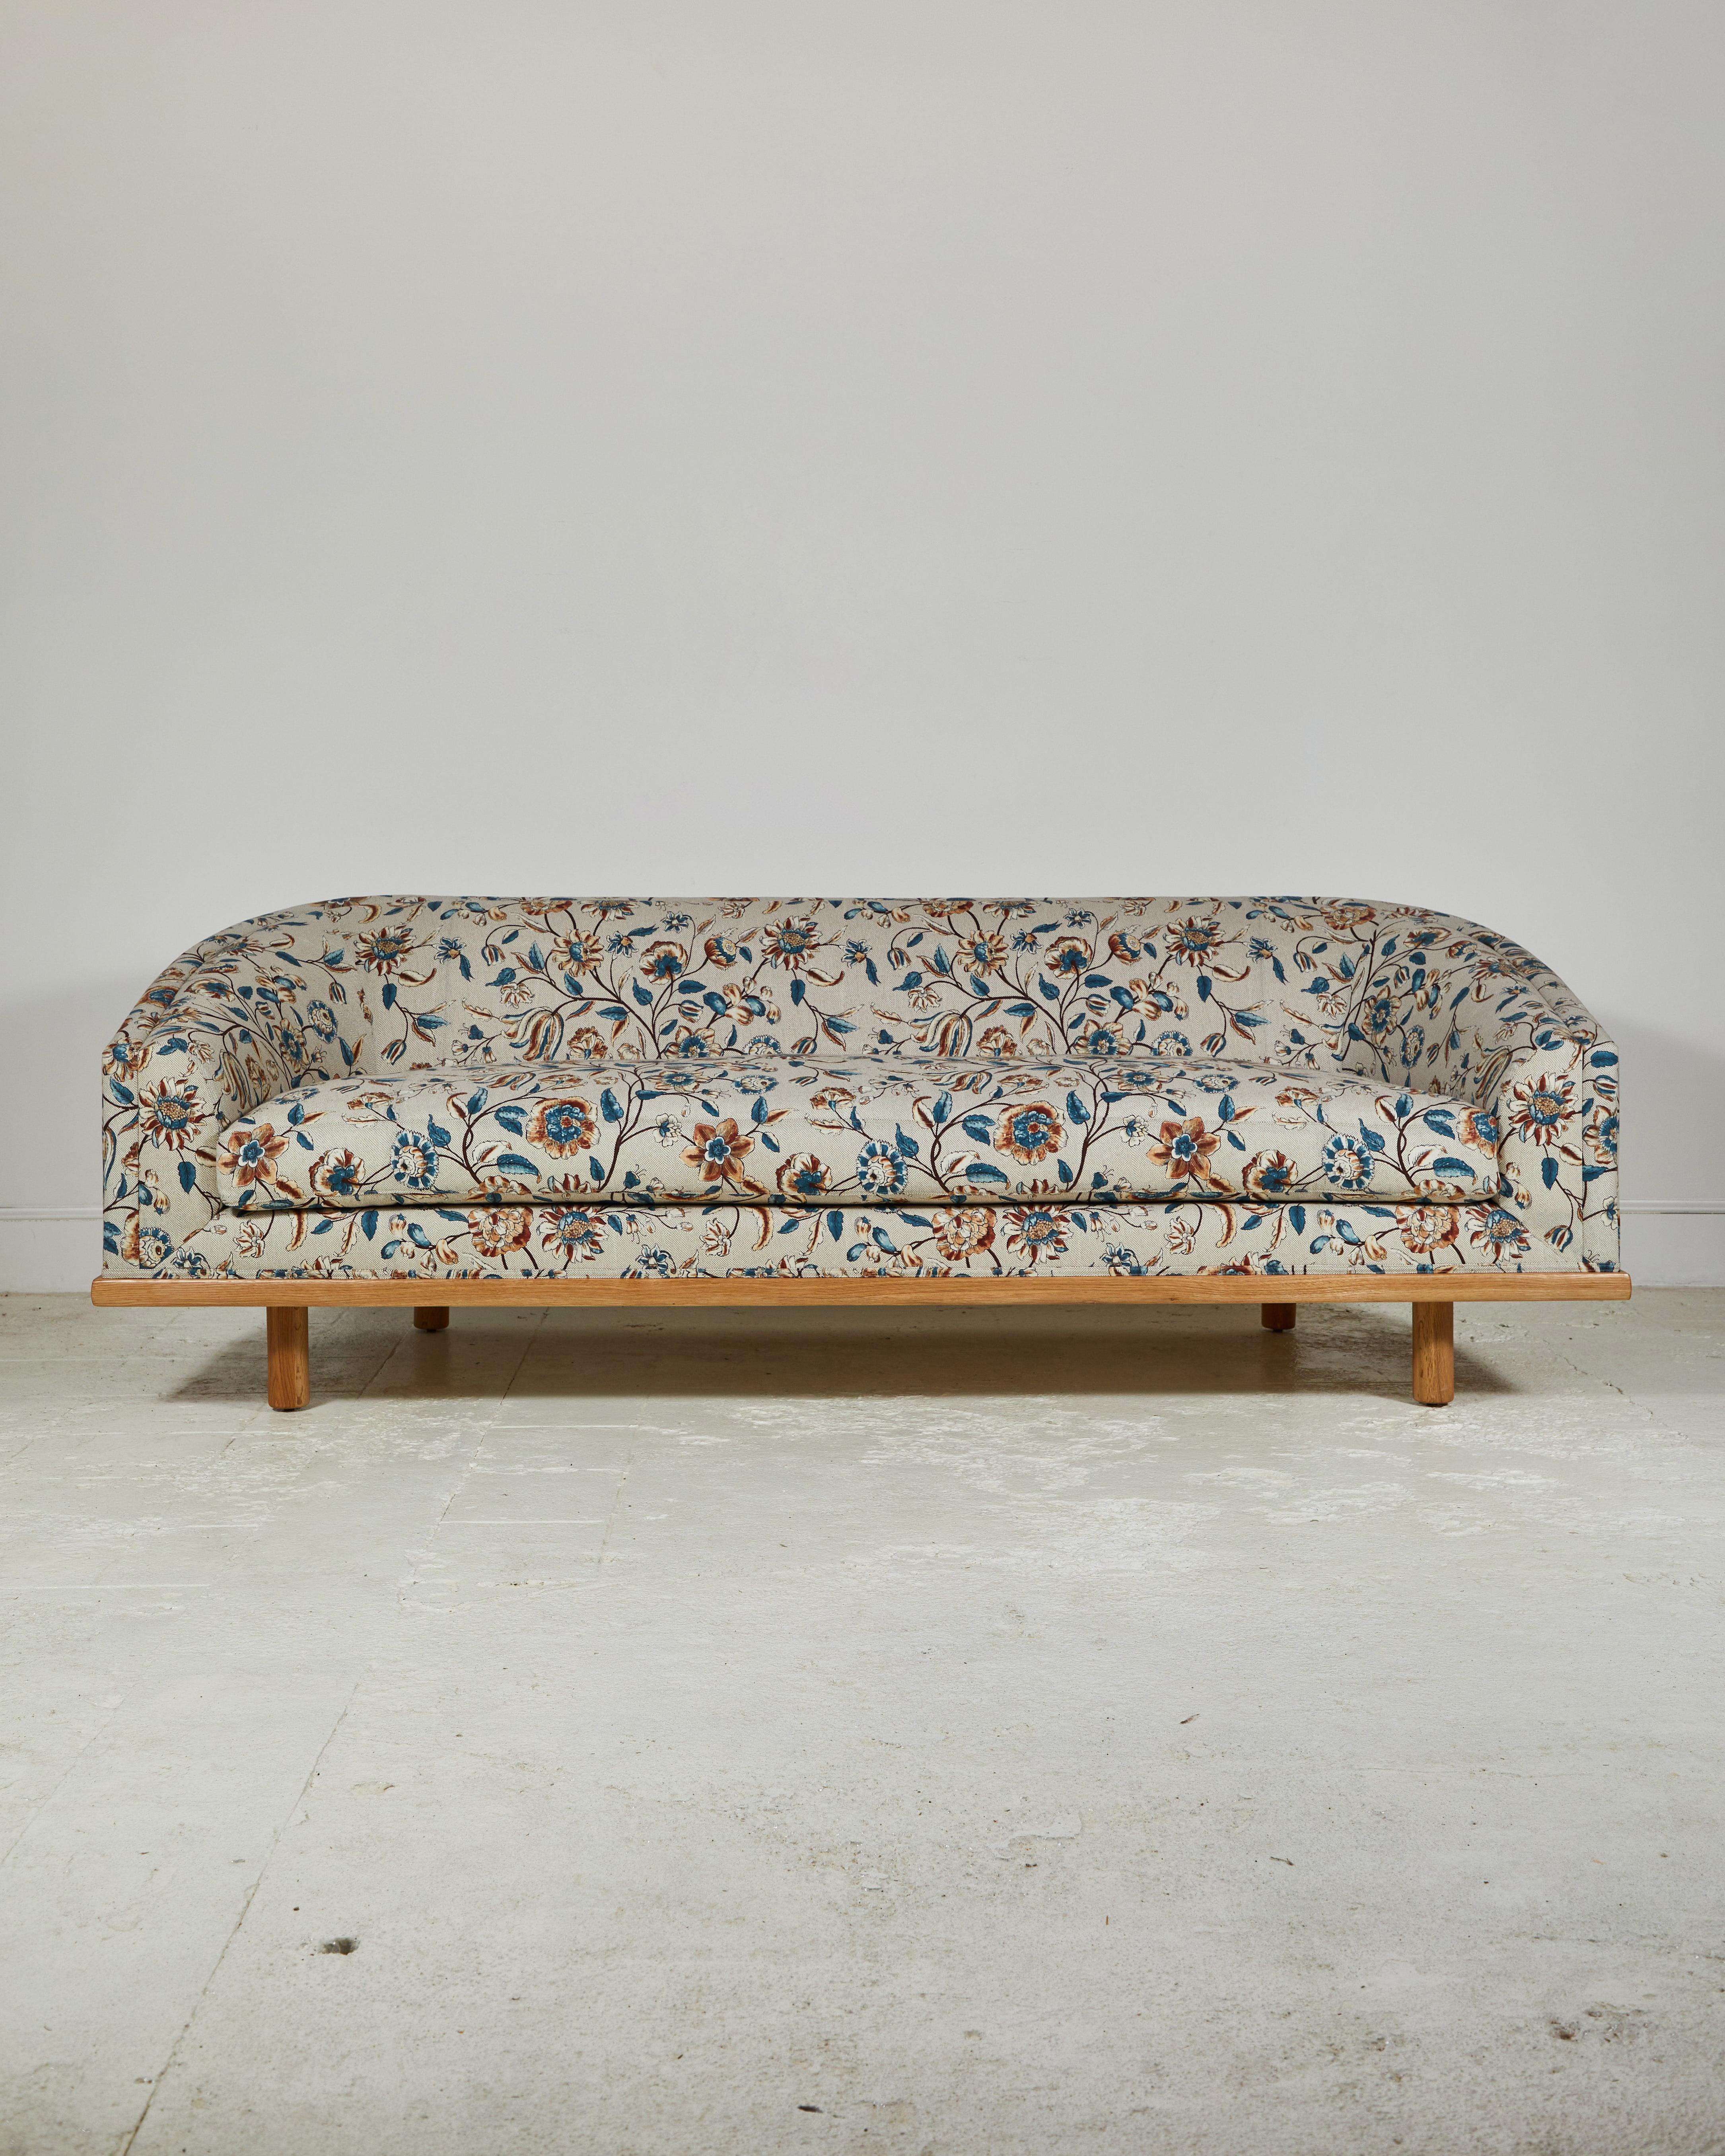 Elegant tight back sofa with curved silhouette and delicious depth. Long single seat down/feather cushion wrapping foam core, set on solid walnut framed-base atop Classic minimal cylinder legs.

This specific sofa is upholstered in floral fabric